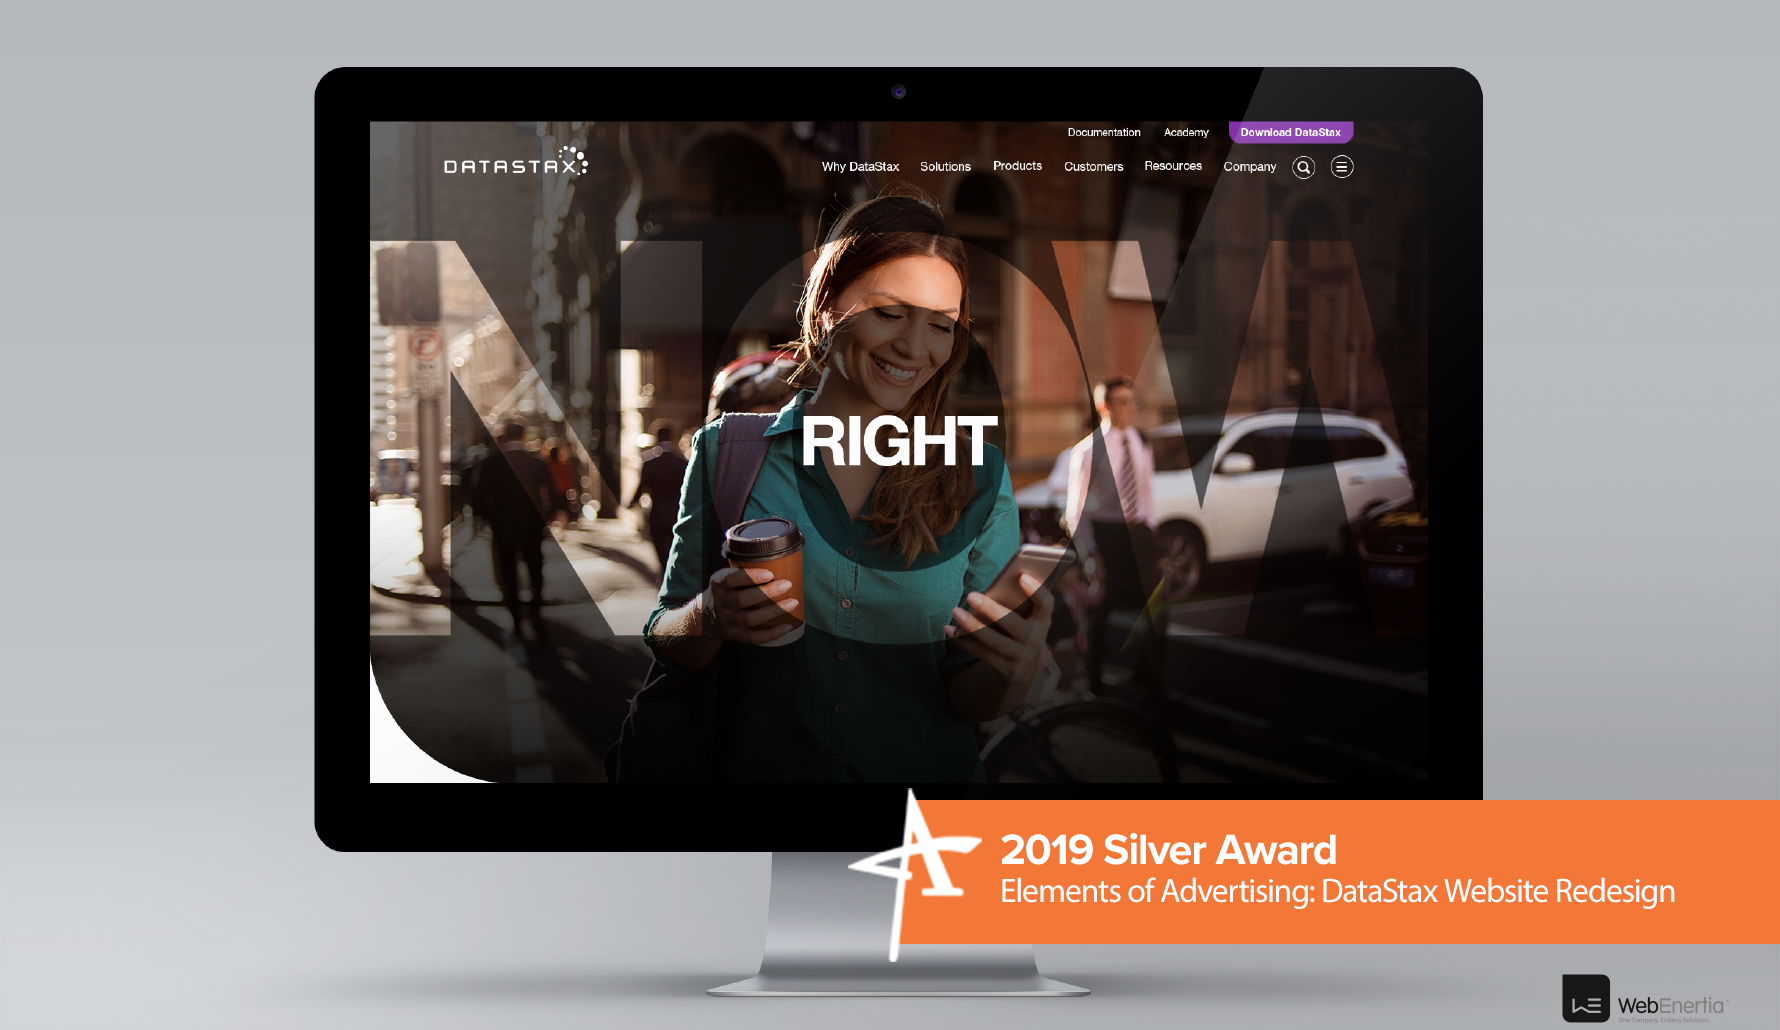 2019 Silver Addy Award - Elements of Advertising: DataStax Website Redesign